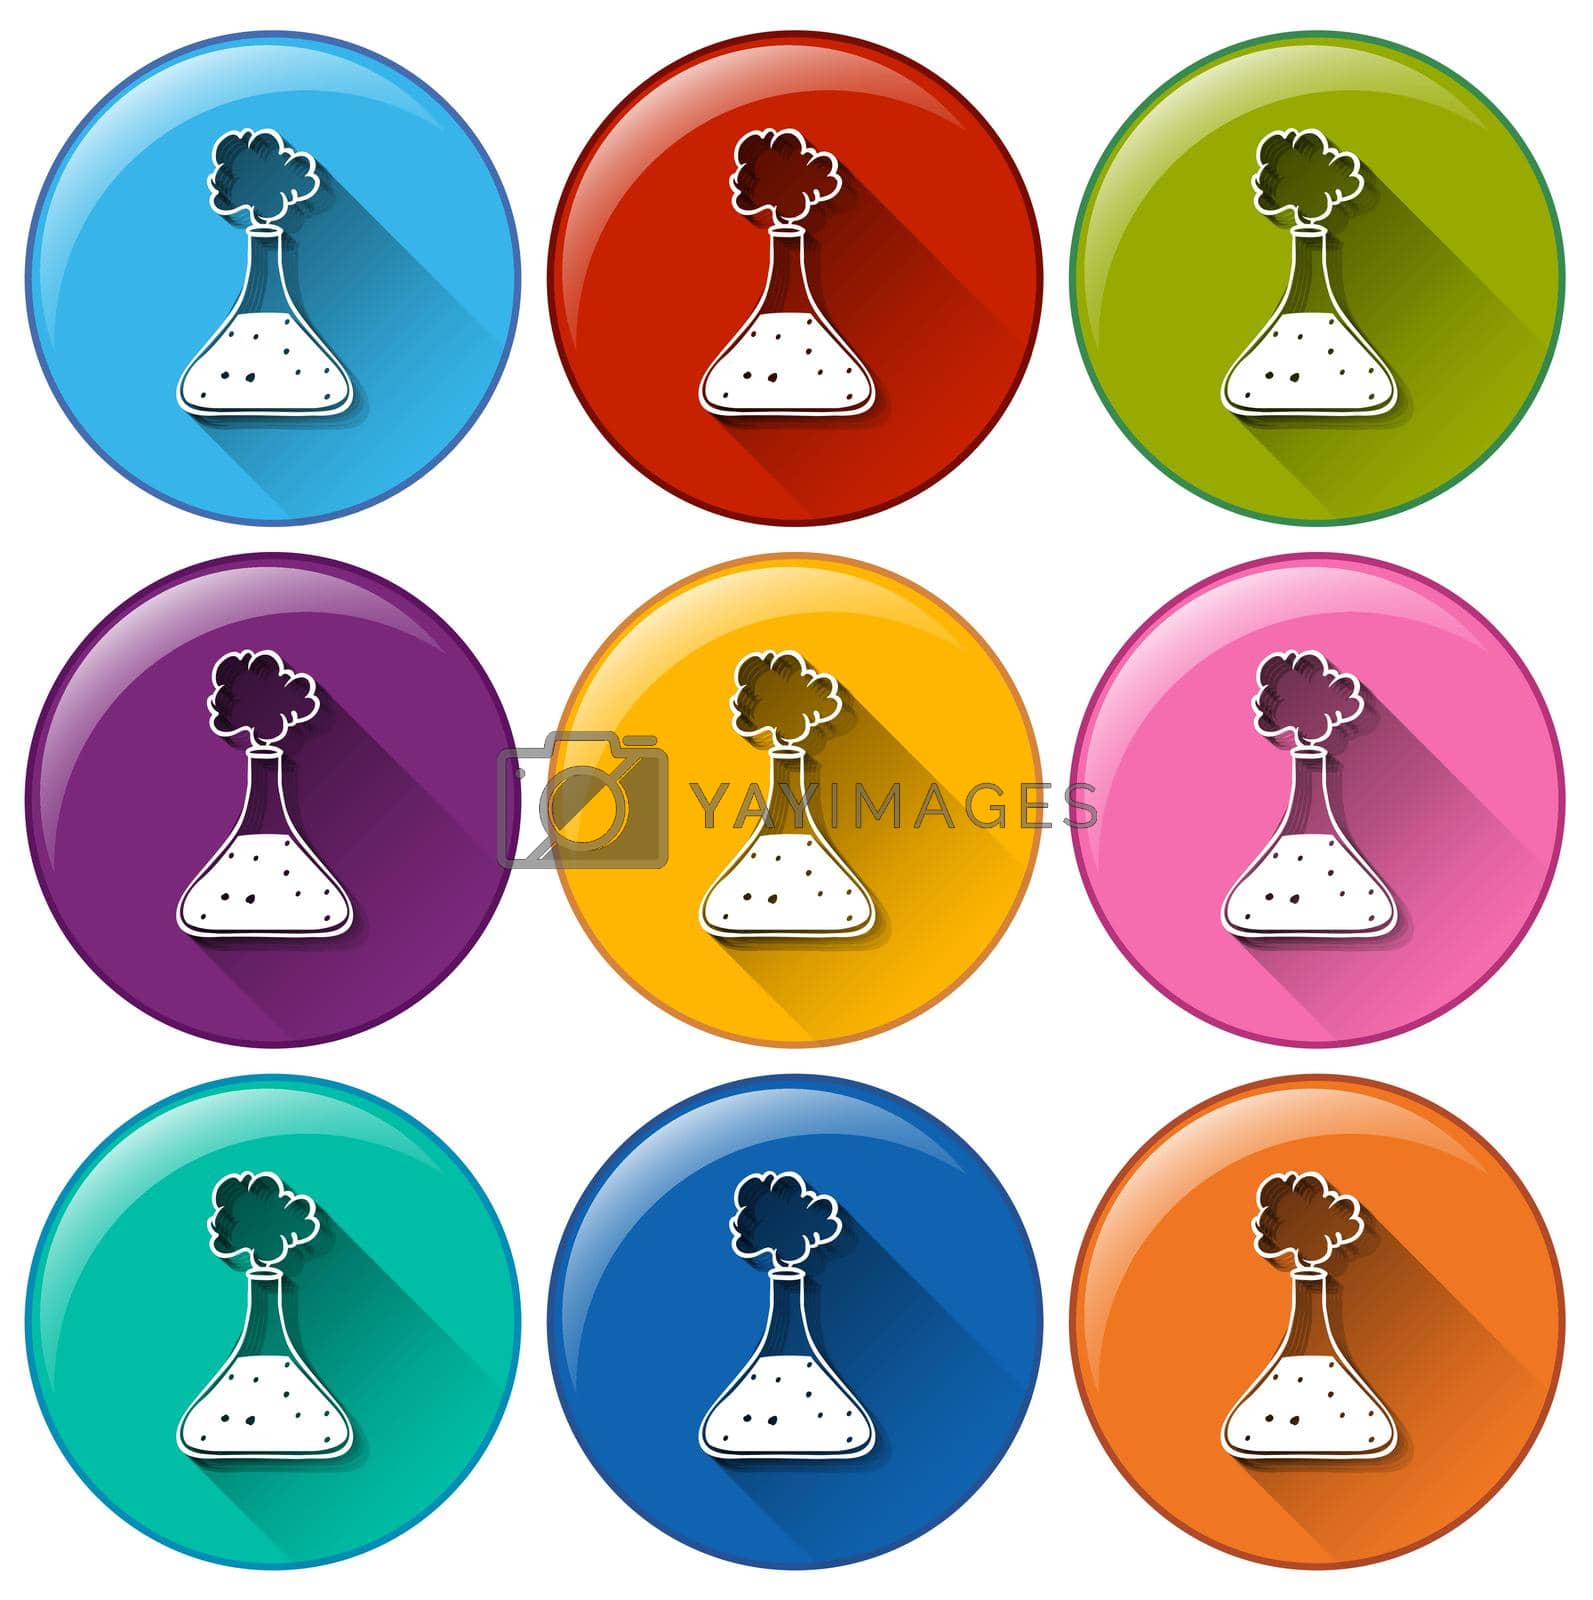 Royalty free image of Round buttons with cylinders by iimages